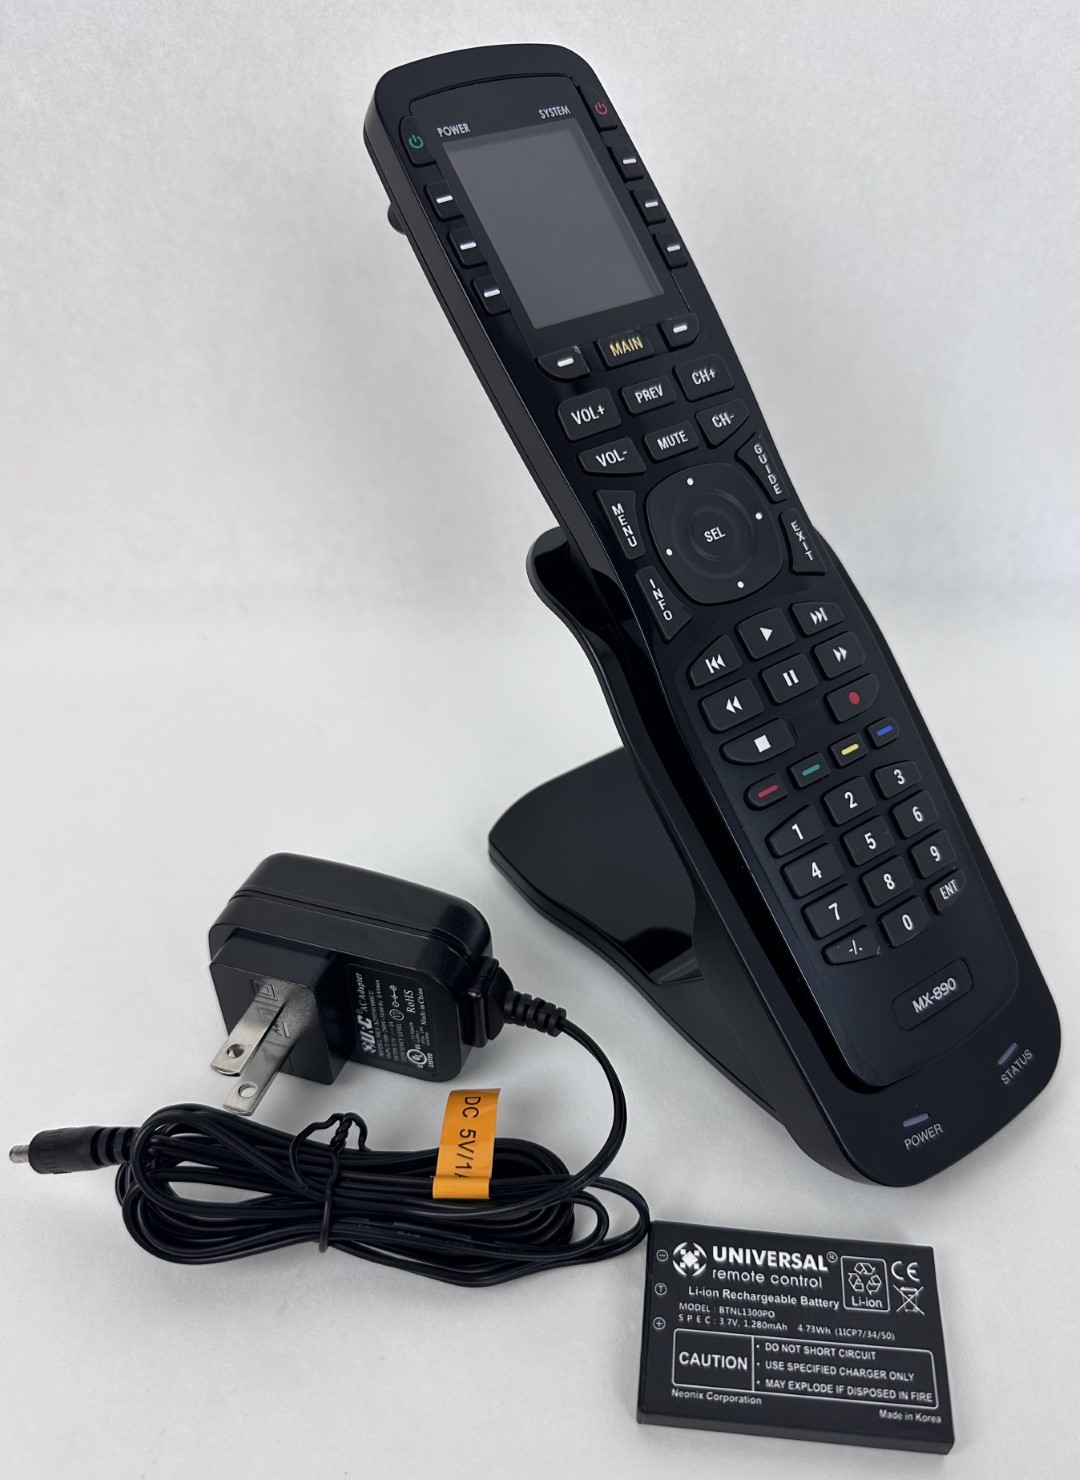 Universal Remote Control IR/RF Open Architecture Remote w/Charging Base MX-890